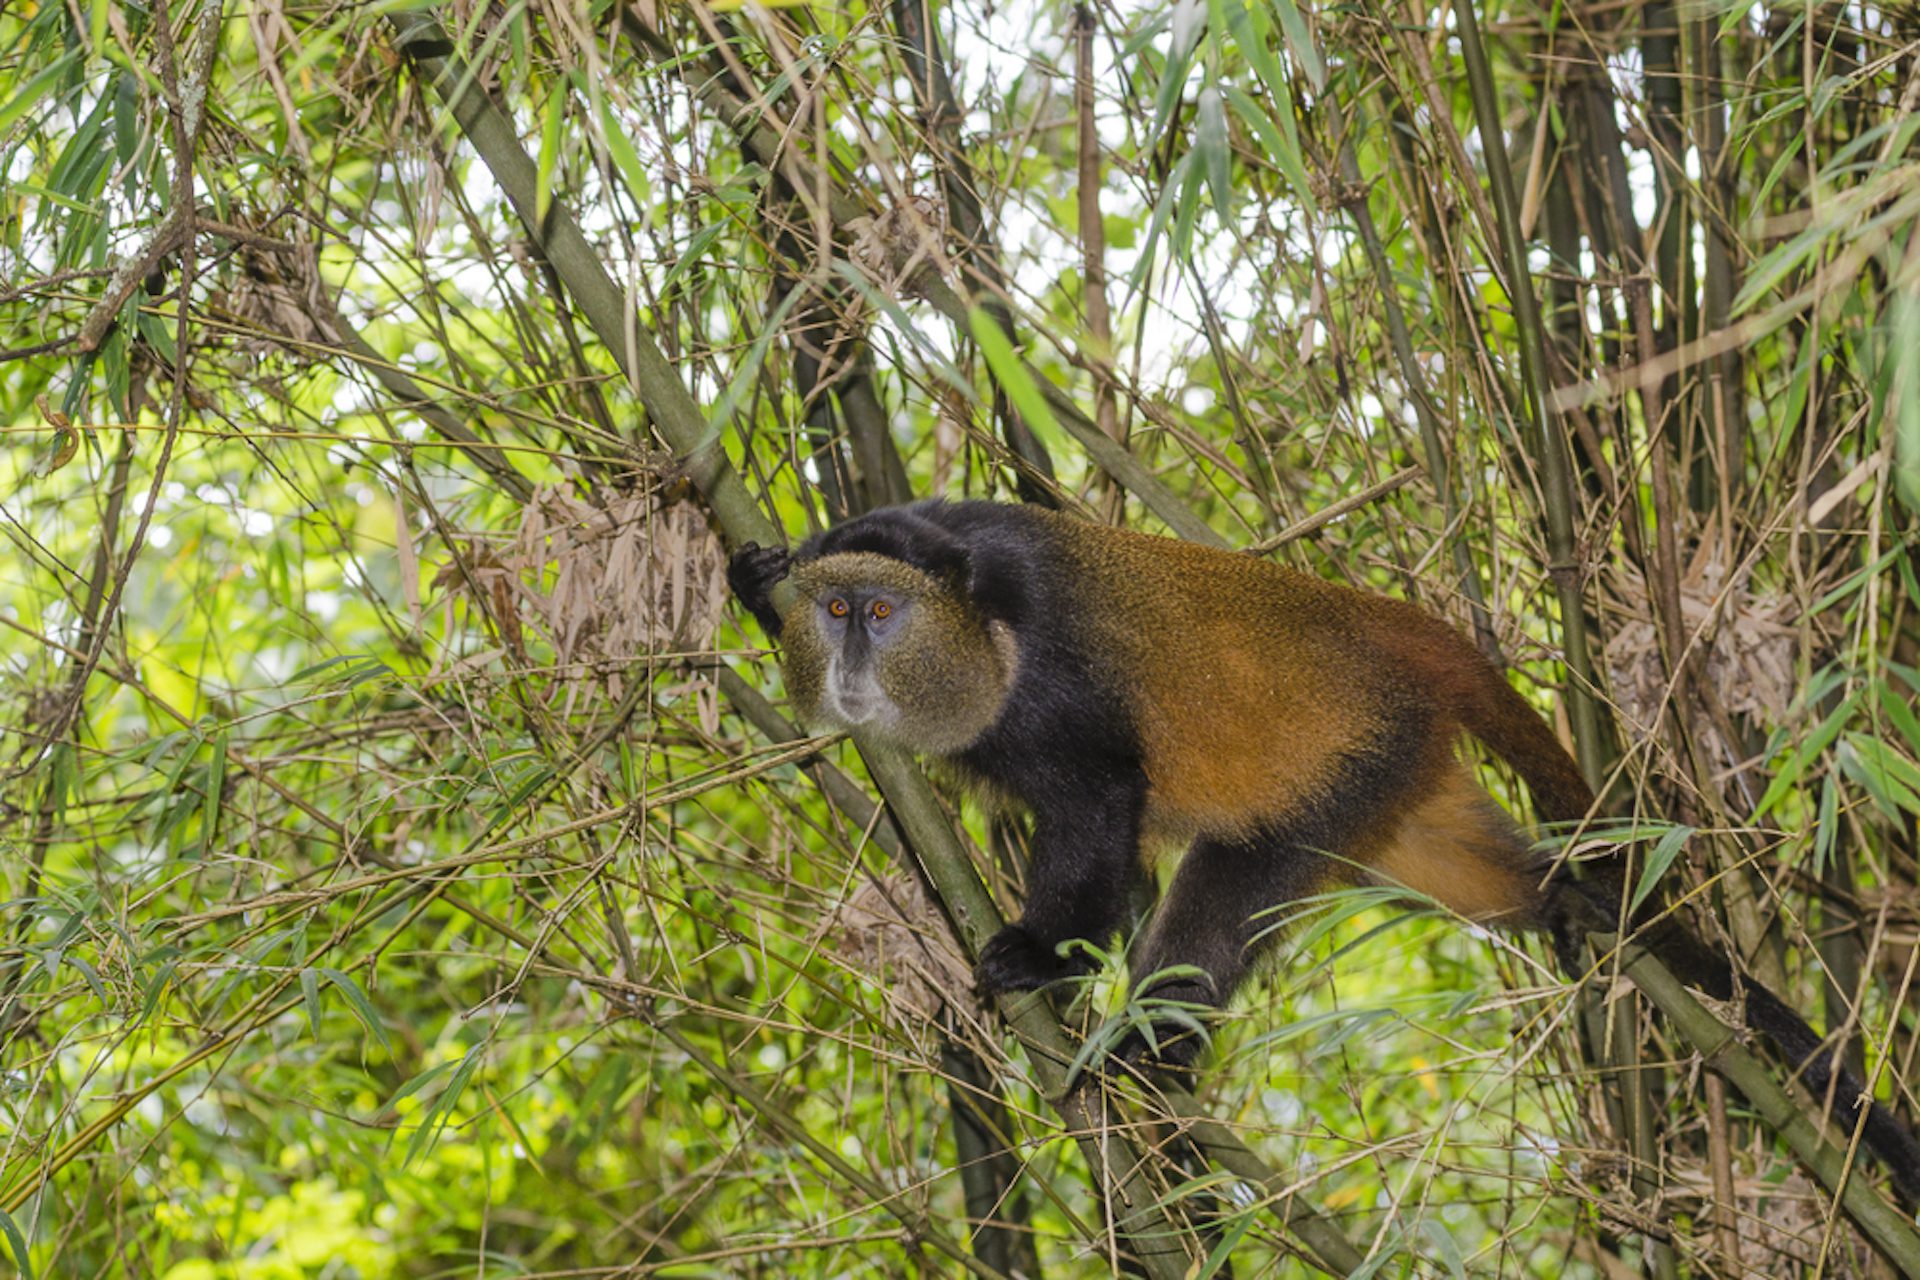 Monkey Sightseeing with World Adventure Tours